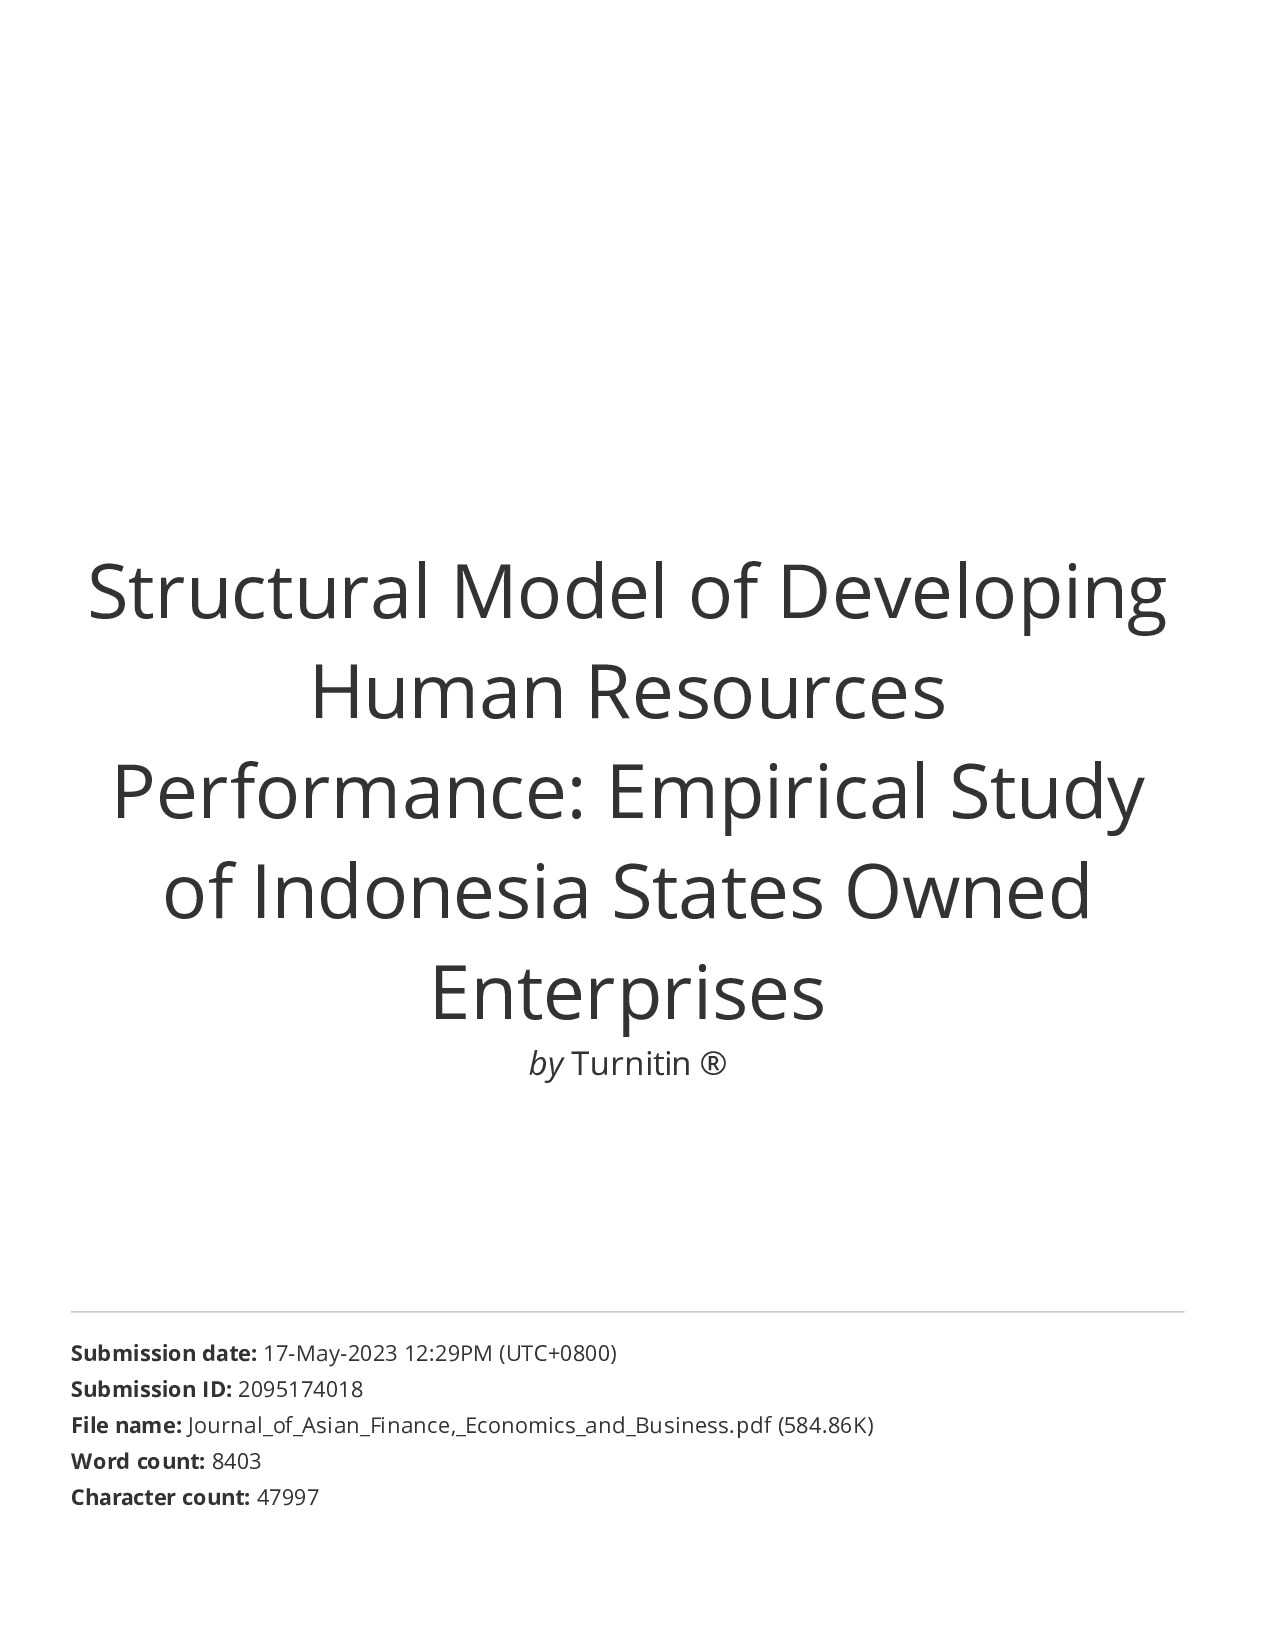 Structural Model of Developing Human Resources Performance_ Empirical Study of Indonesia States Owned Enterprises